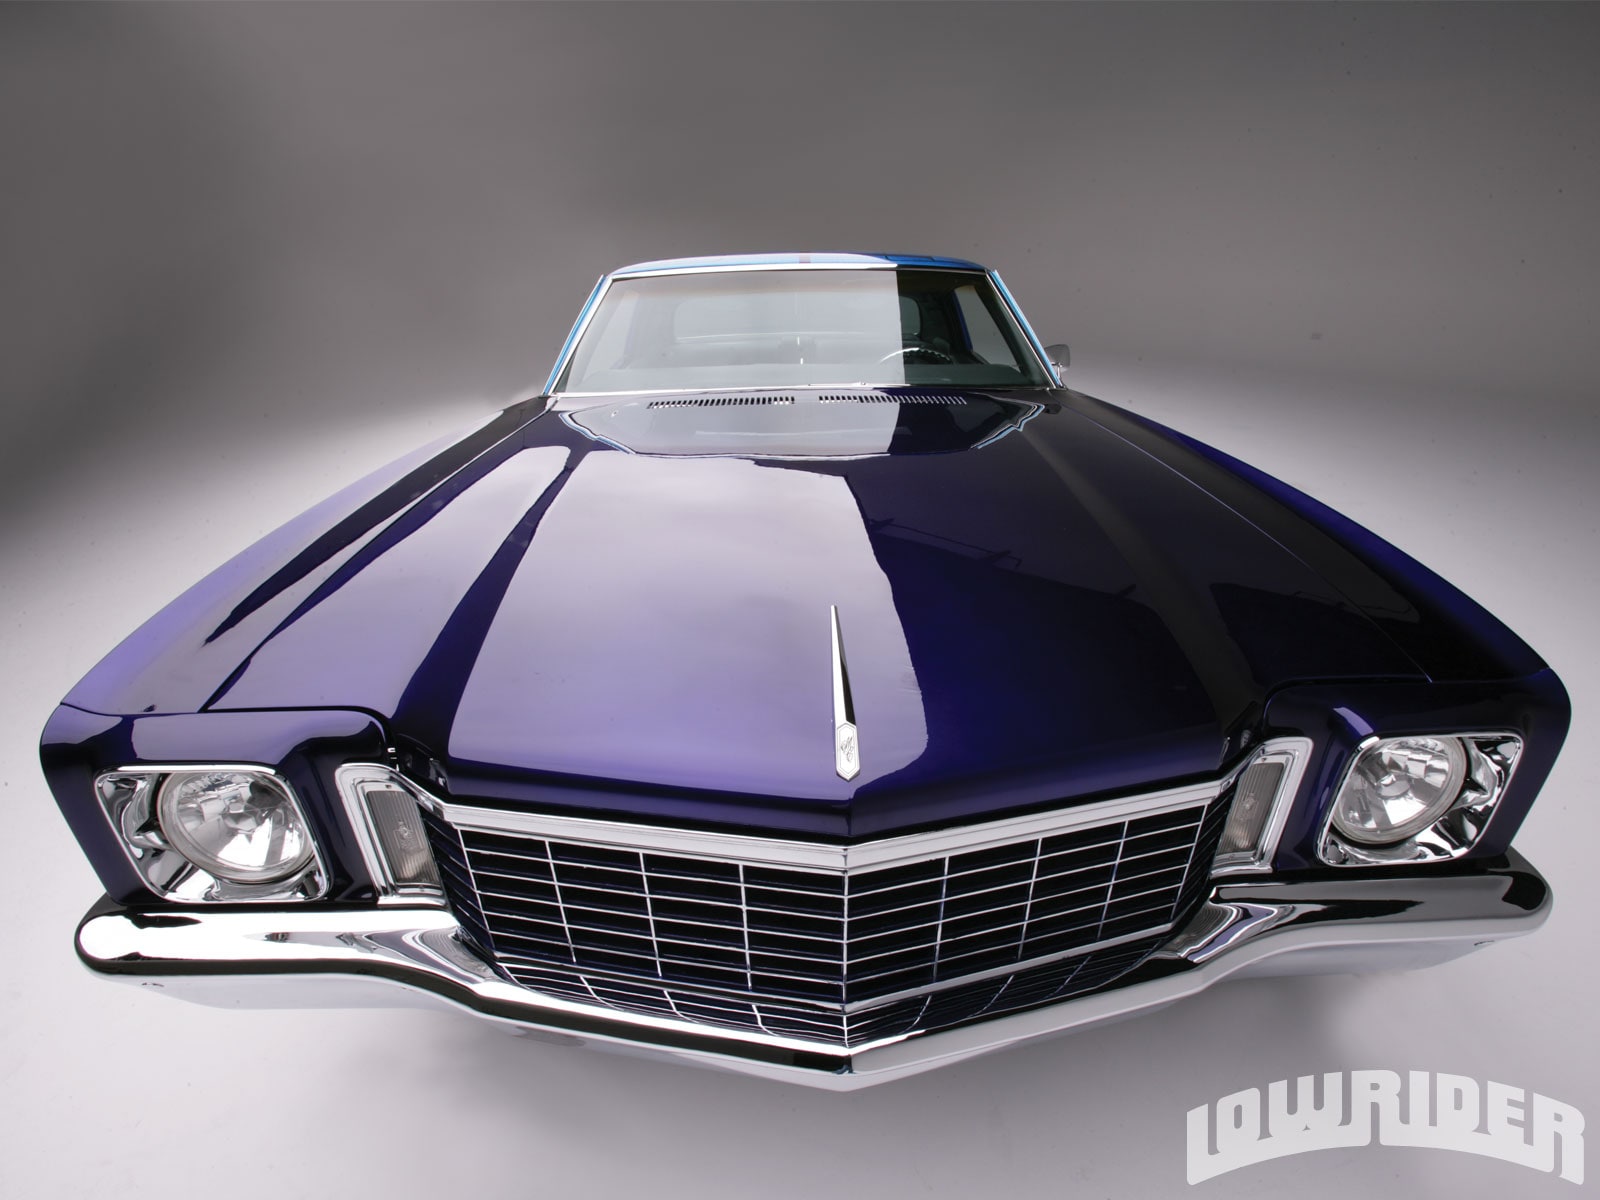 1972 Chevrolet Monte Carlo - Out Of The Blues